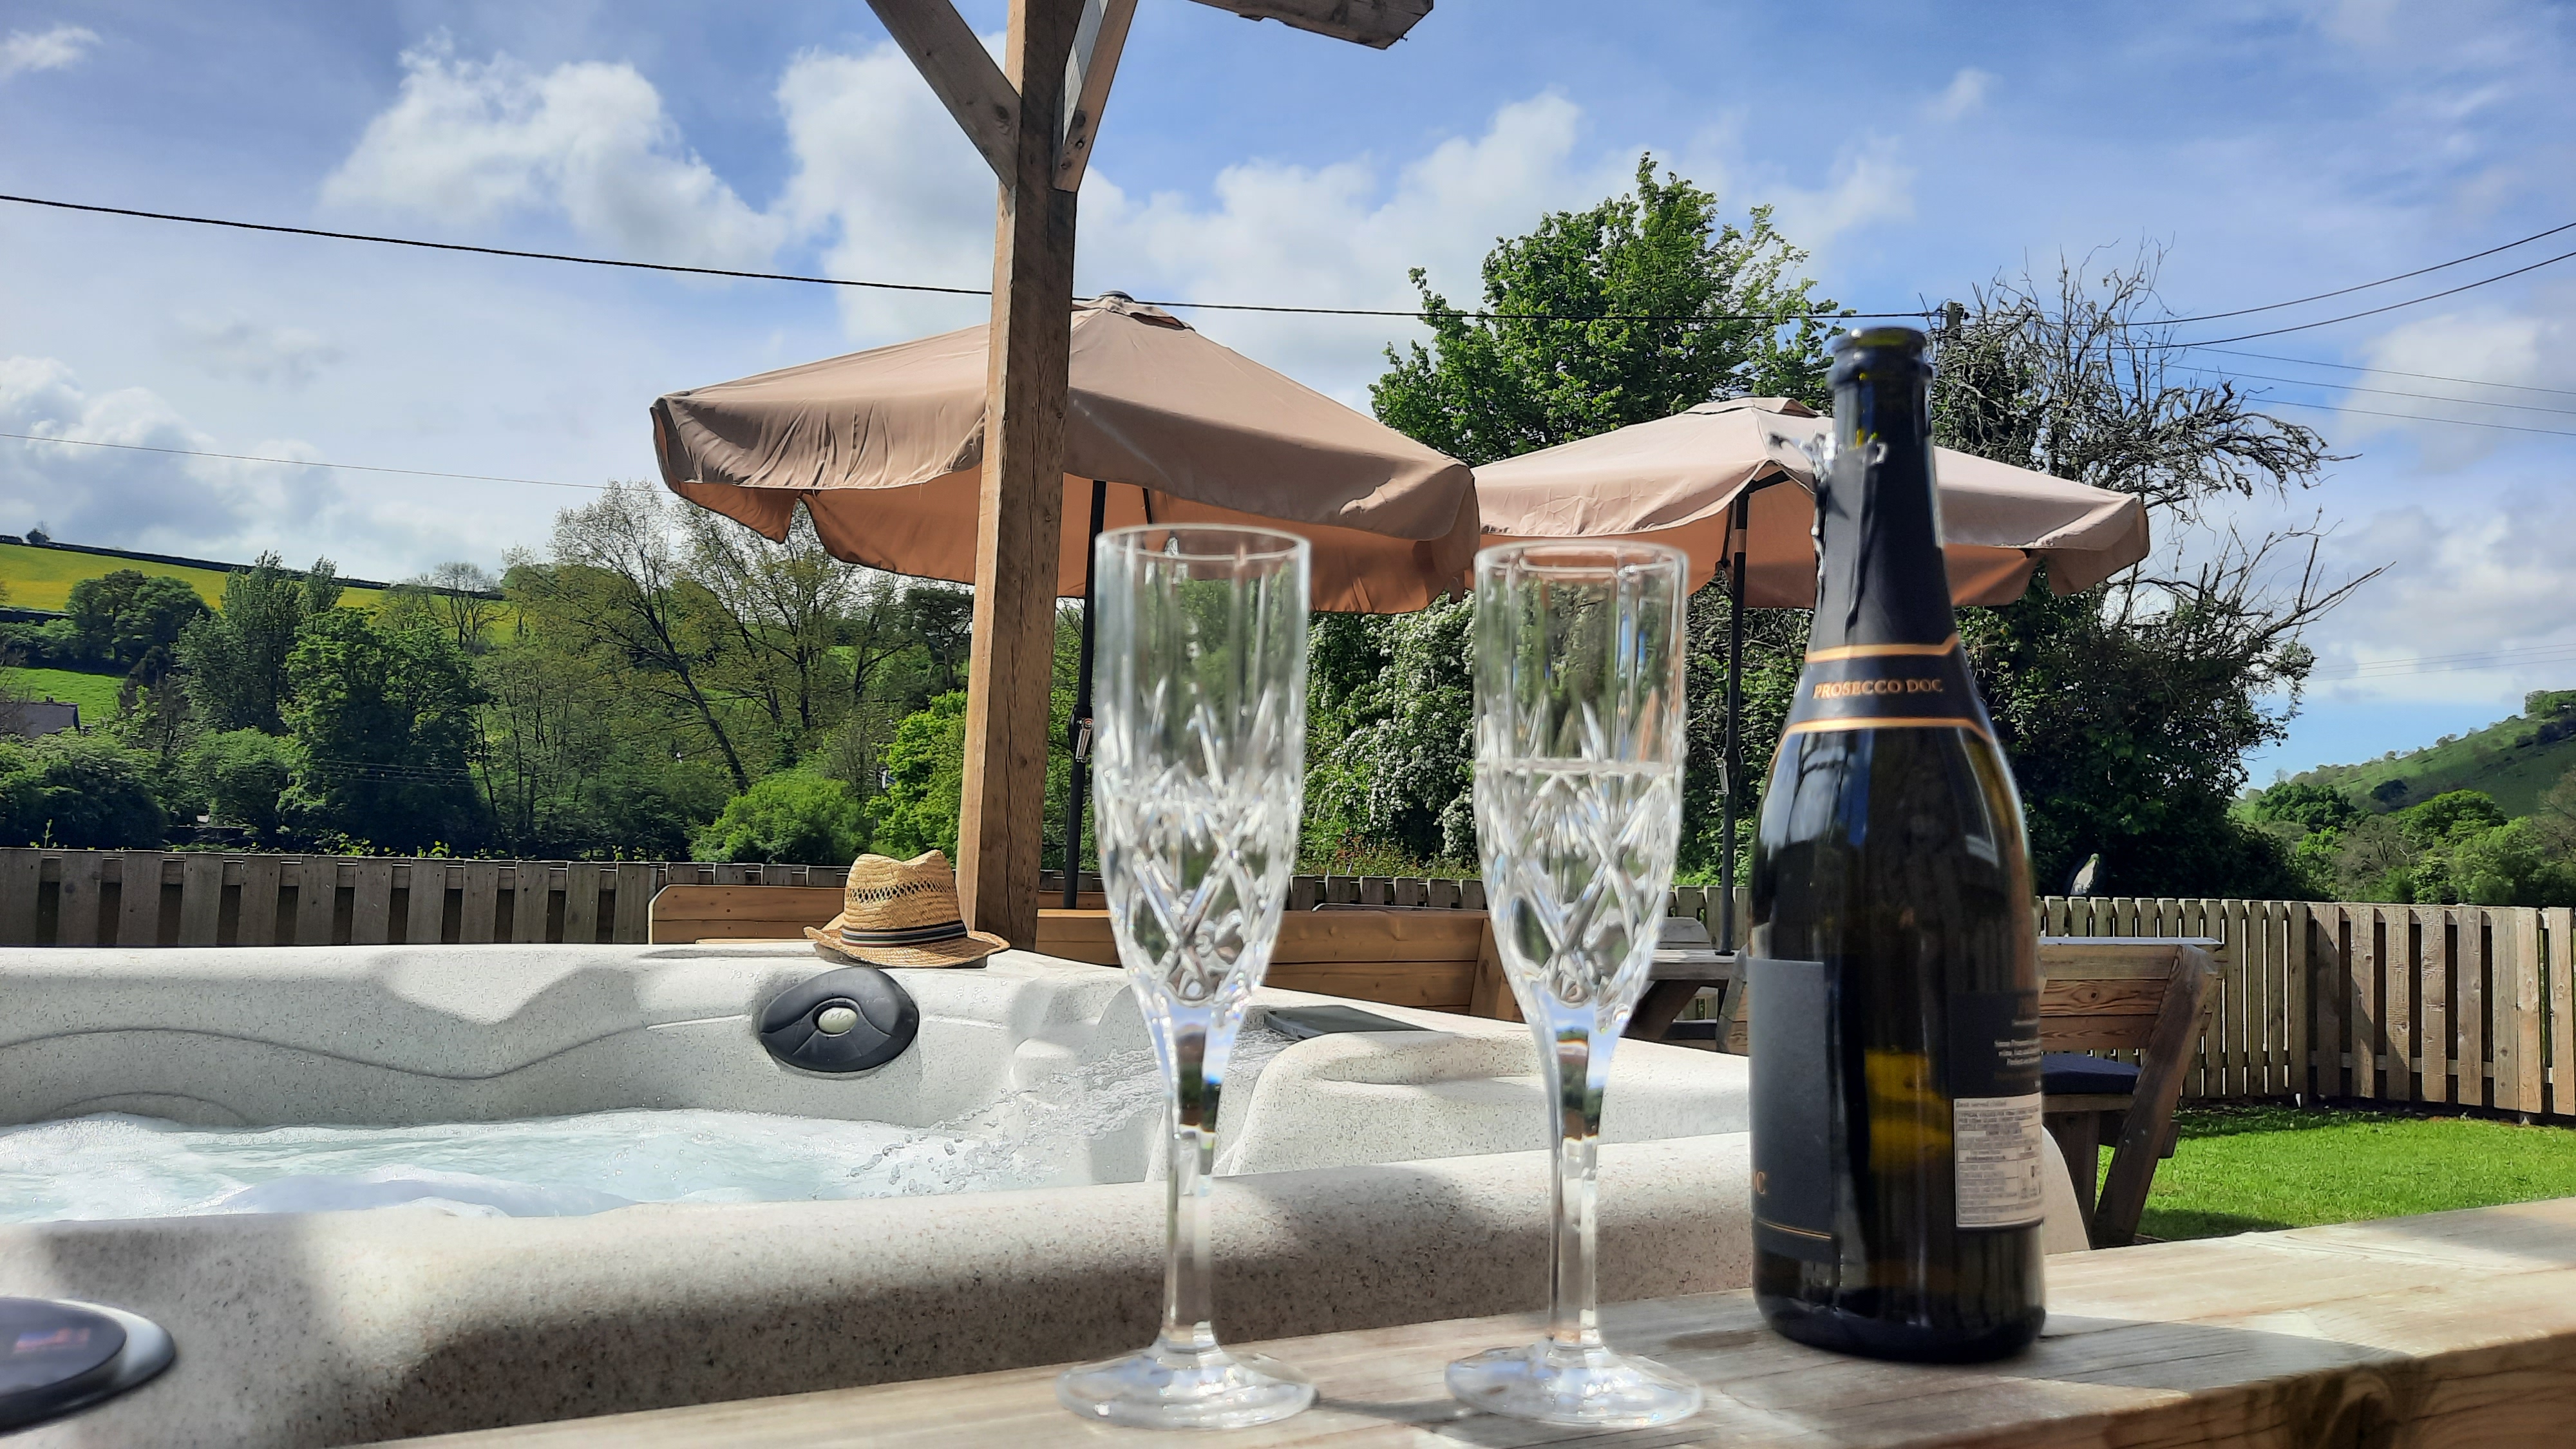 The Elms Devon - glass of fizz to celebrate in the hot tub